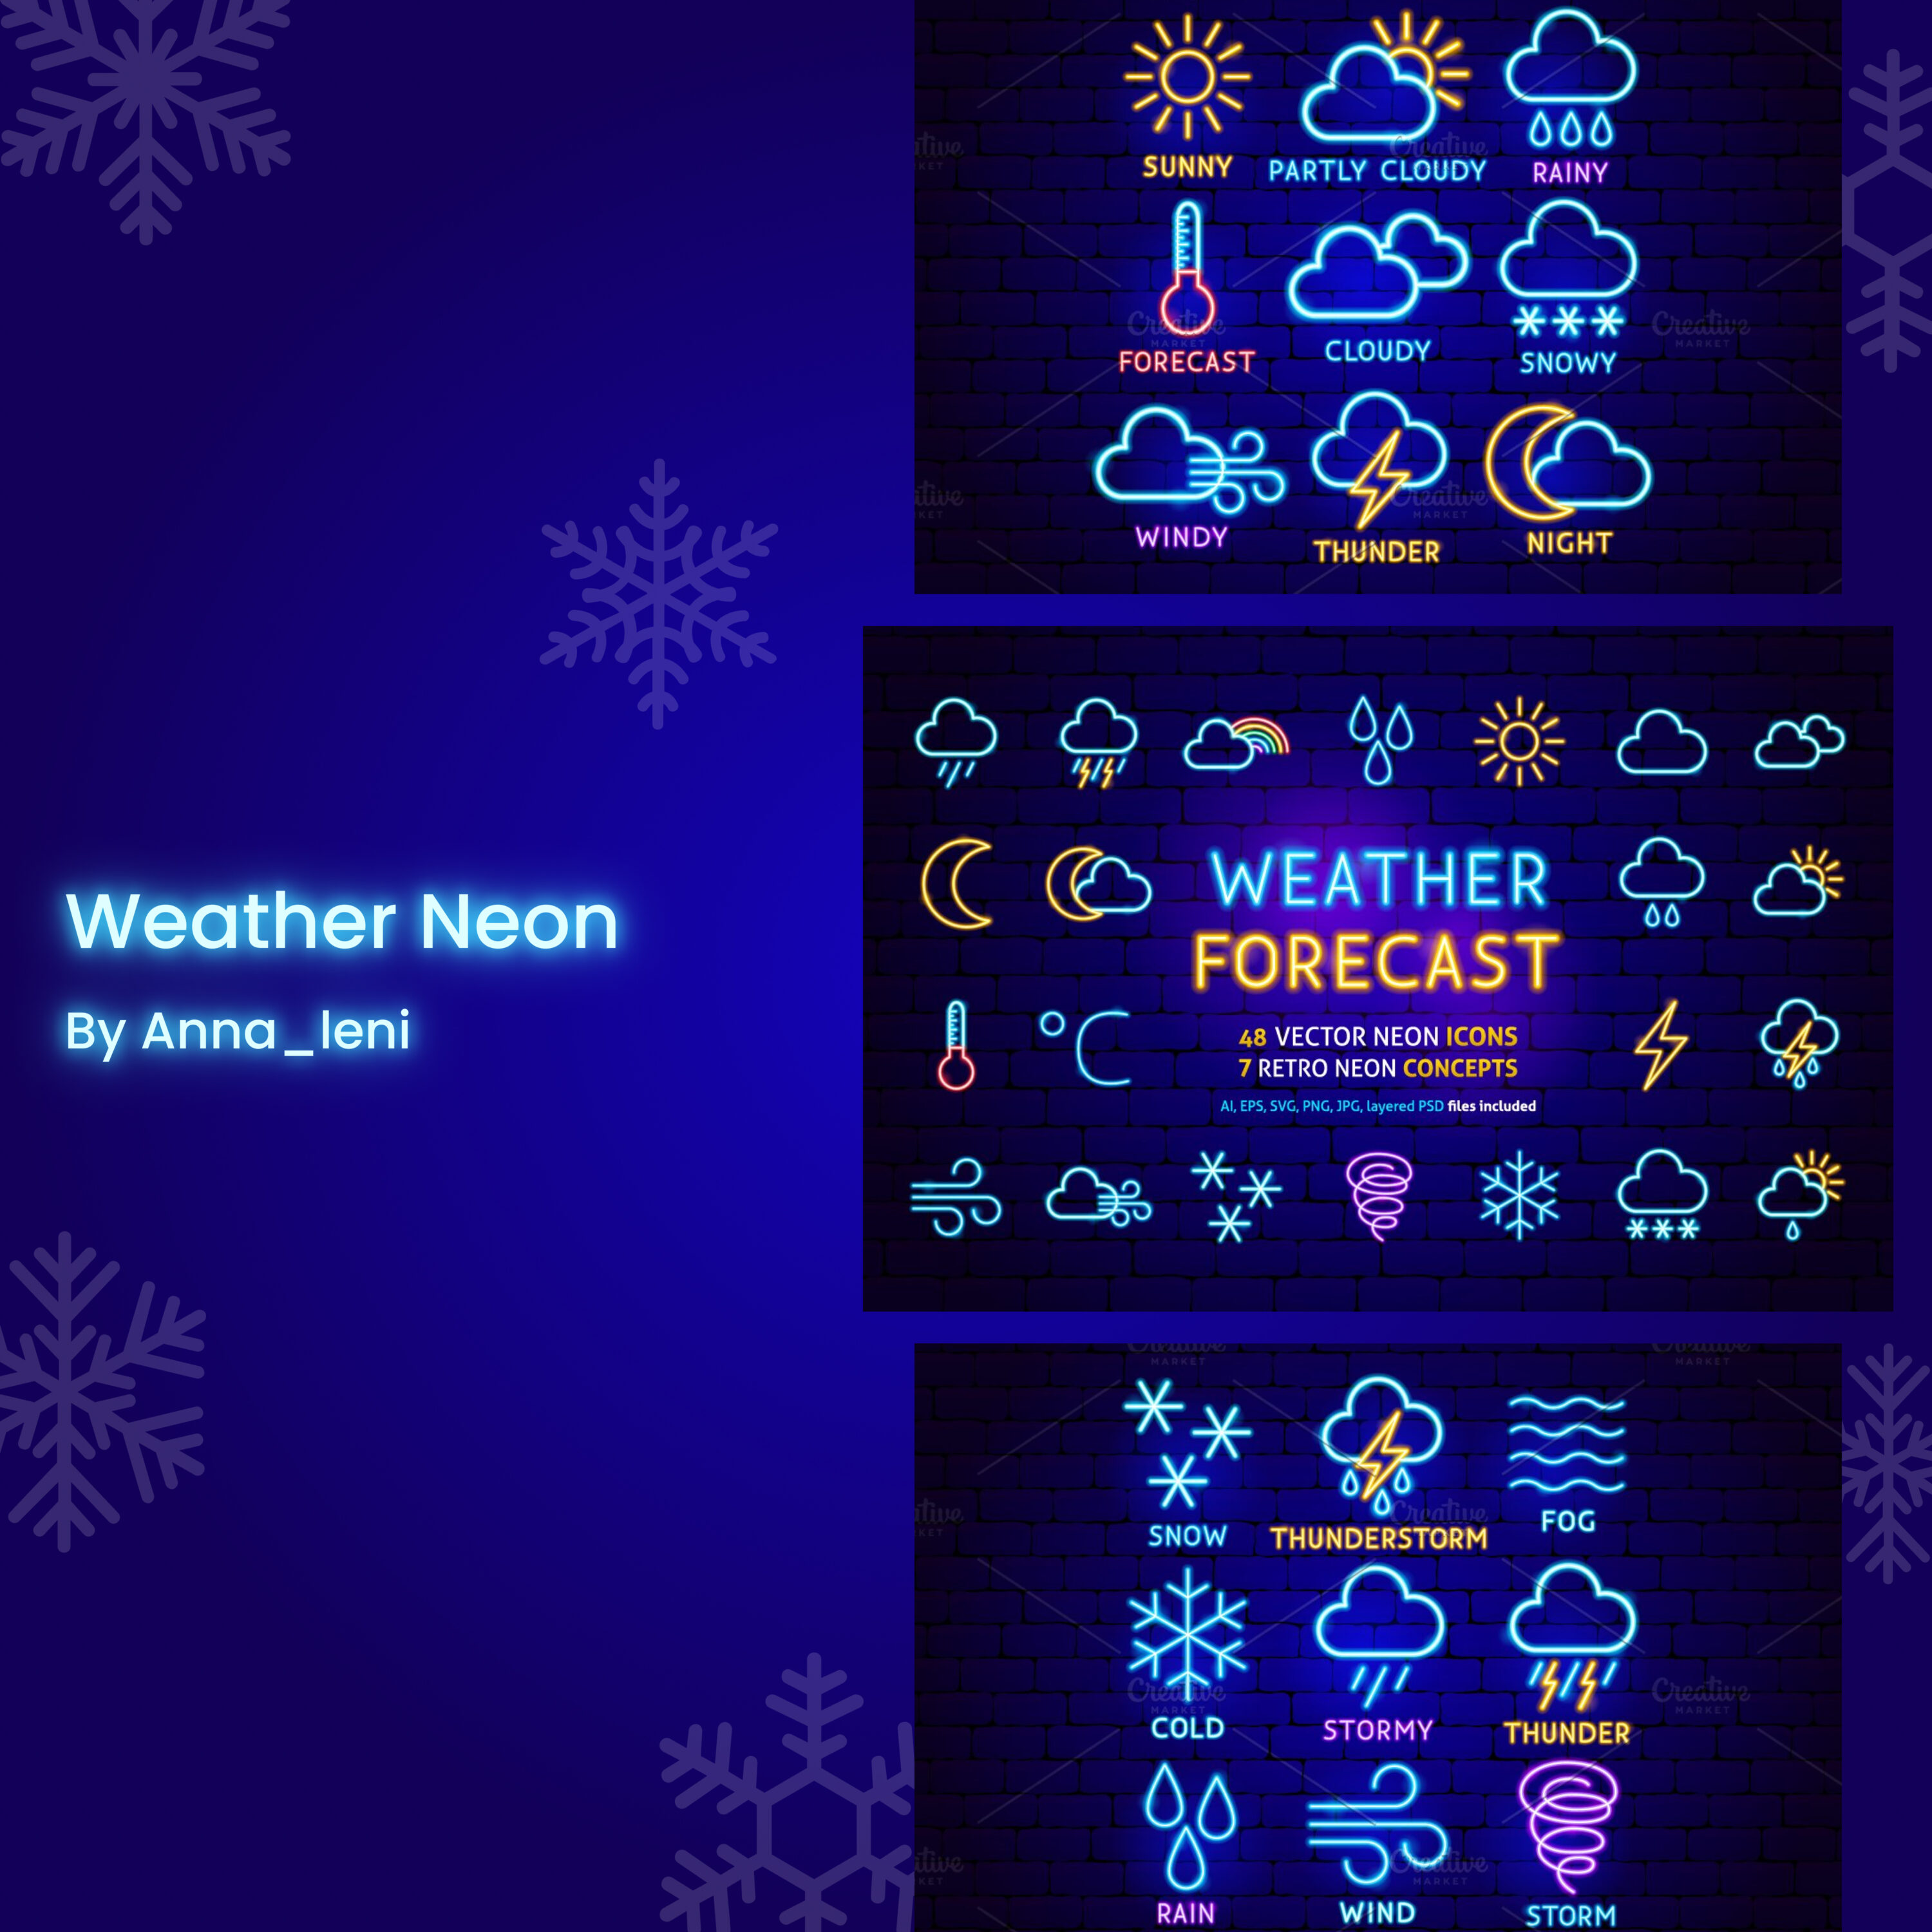 Weather neon image preview.